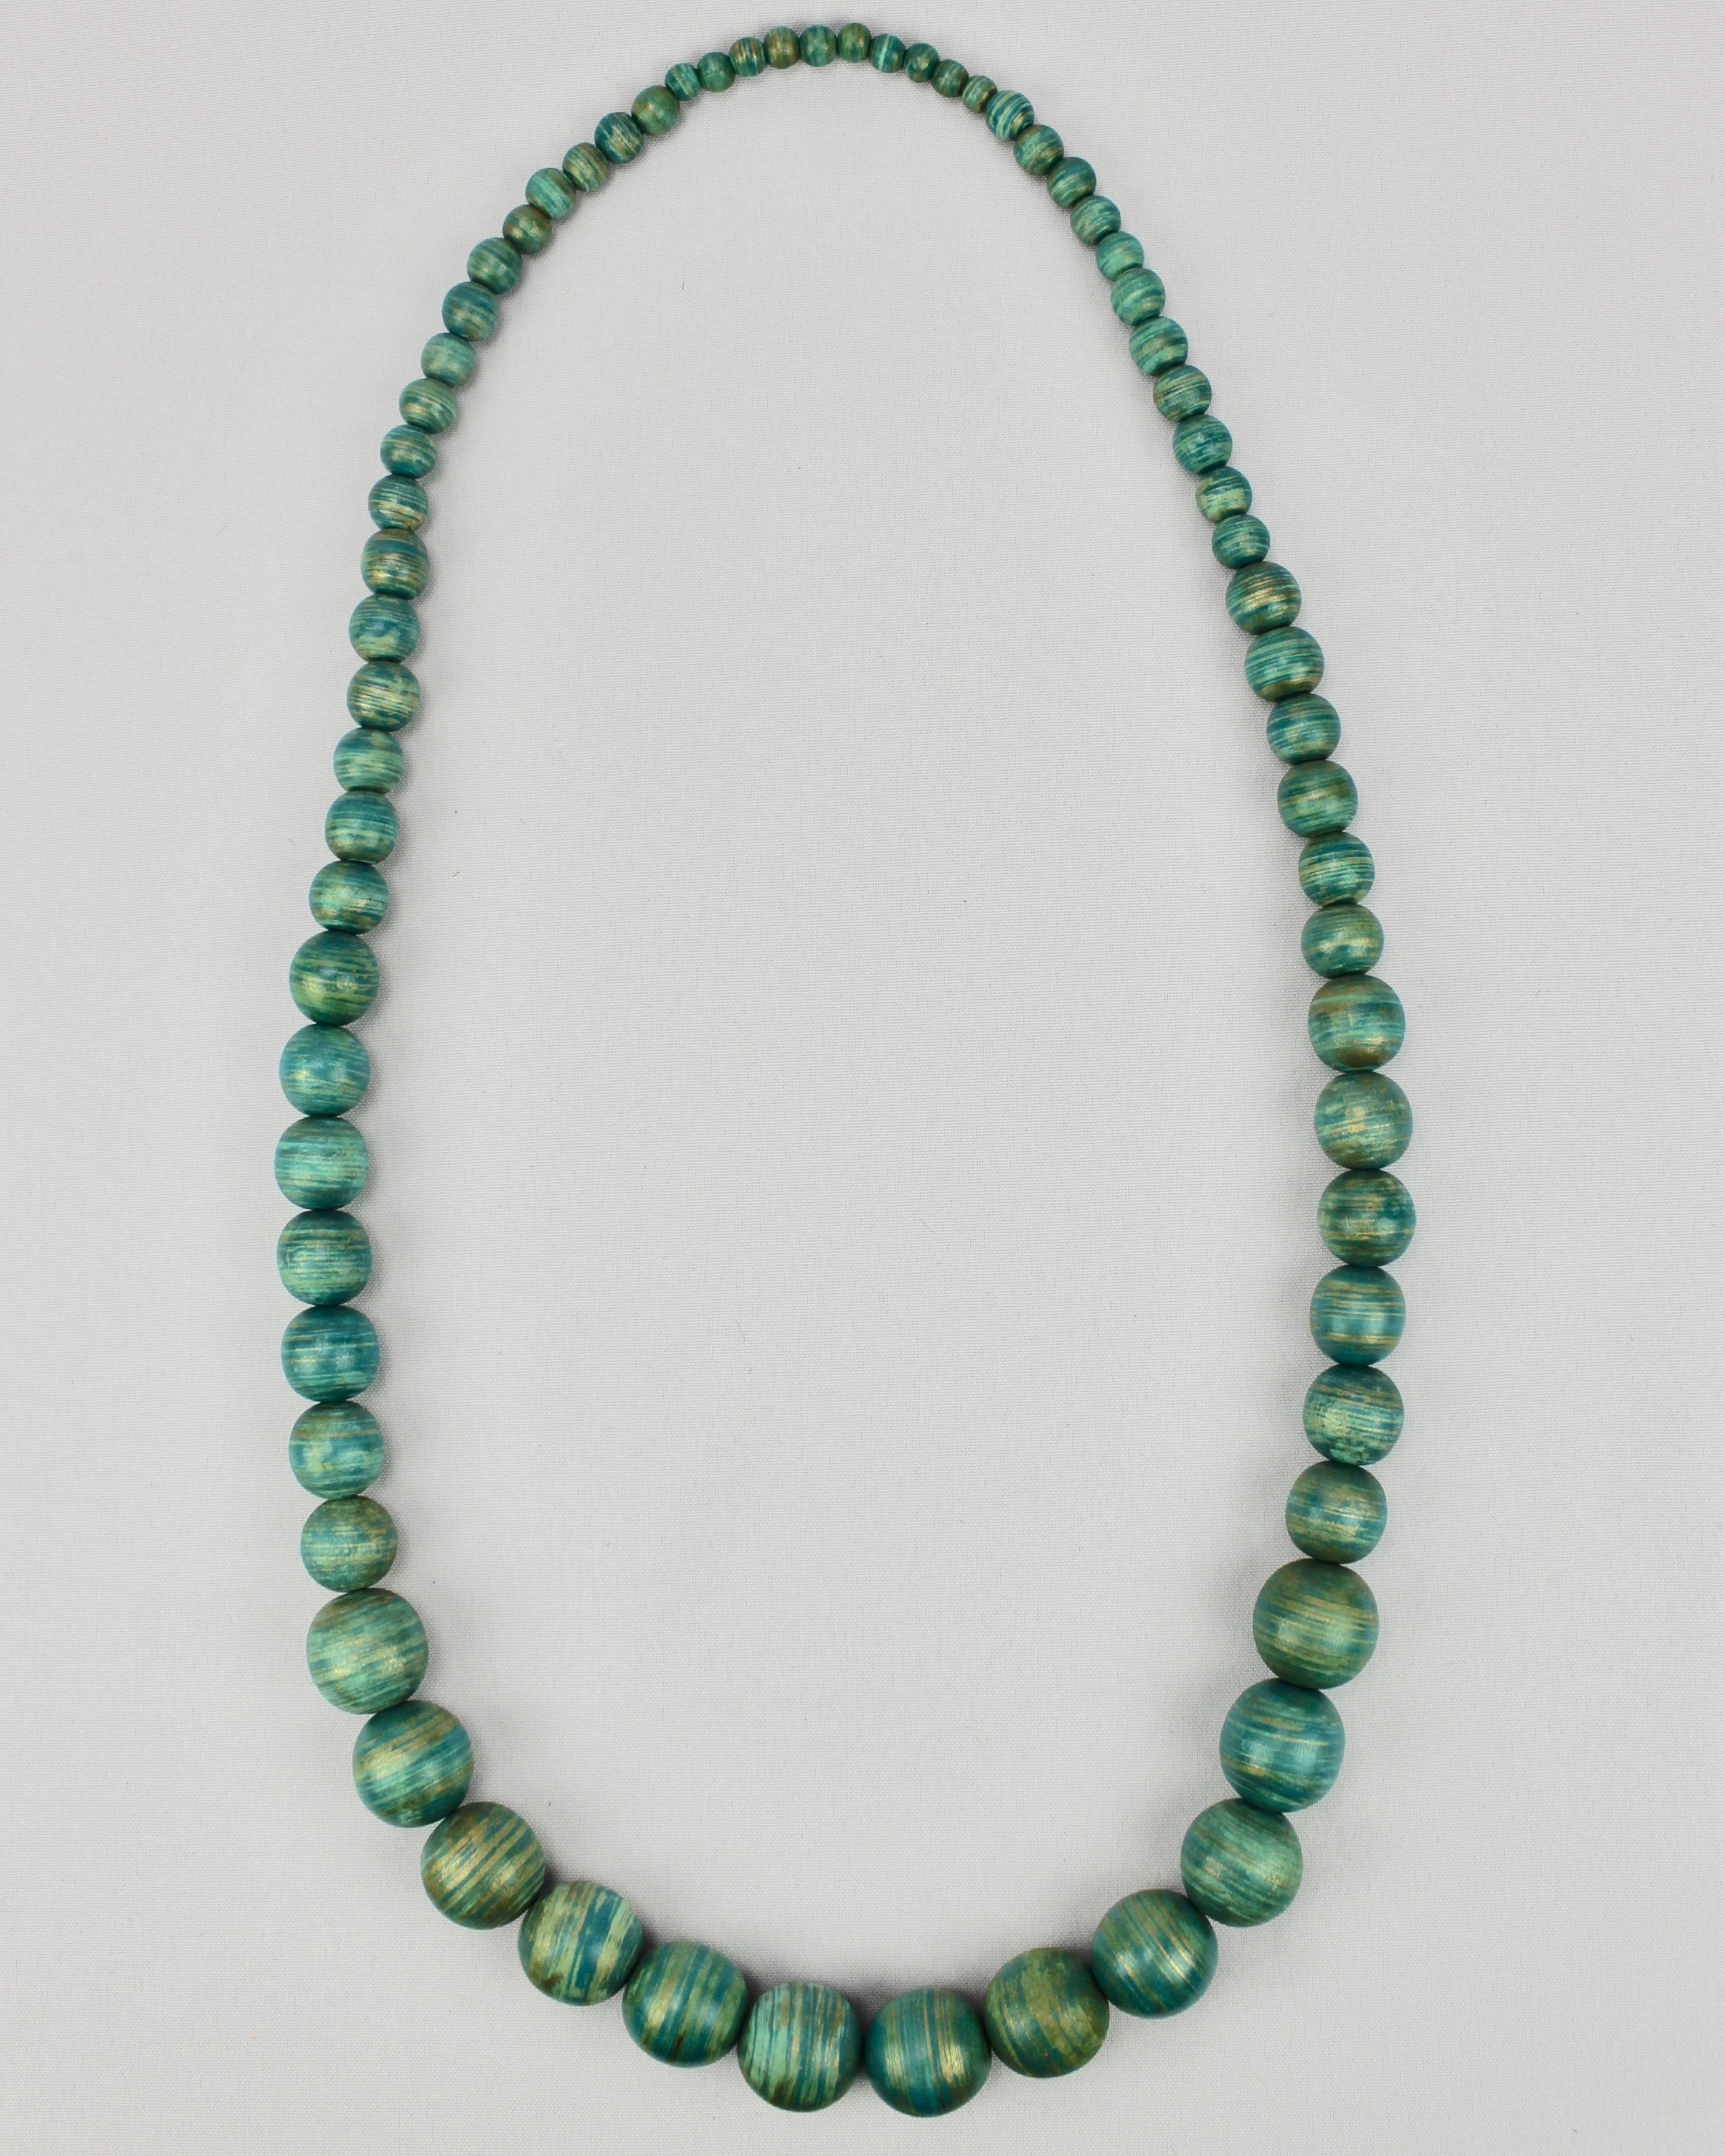 Collier Bois Turquoise Chamarré Or